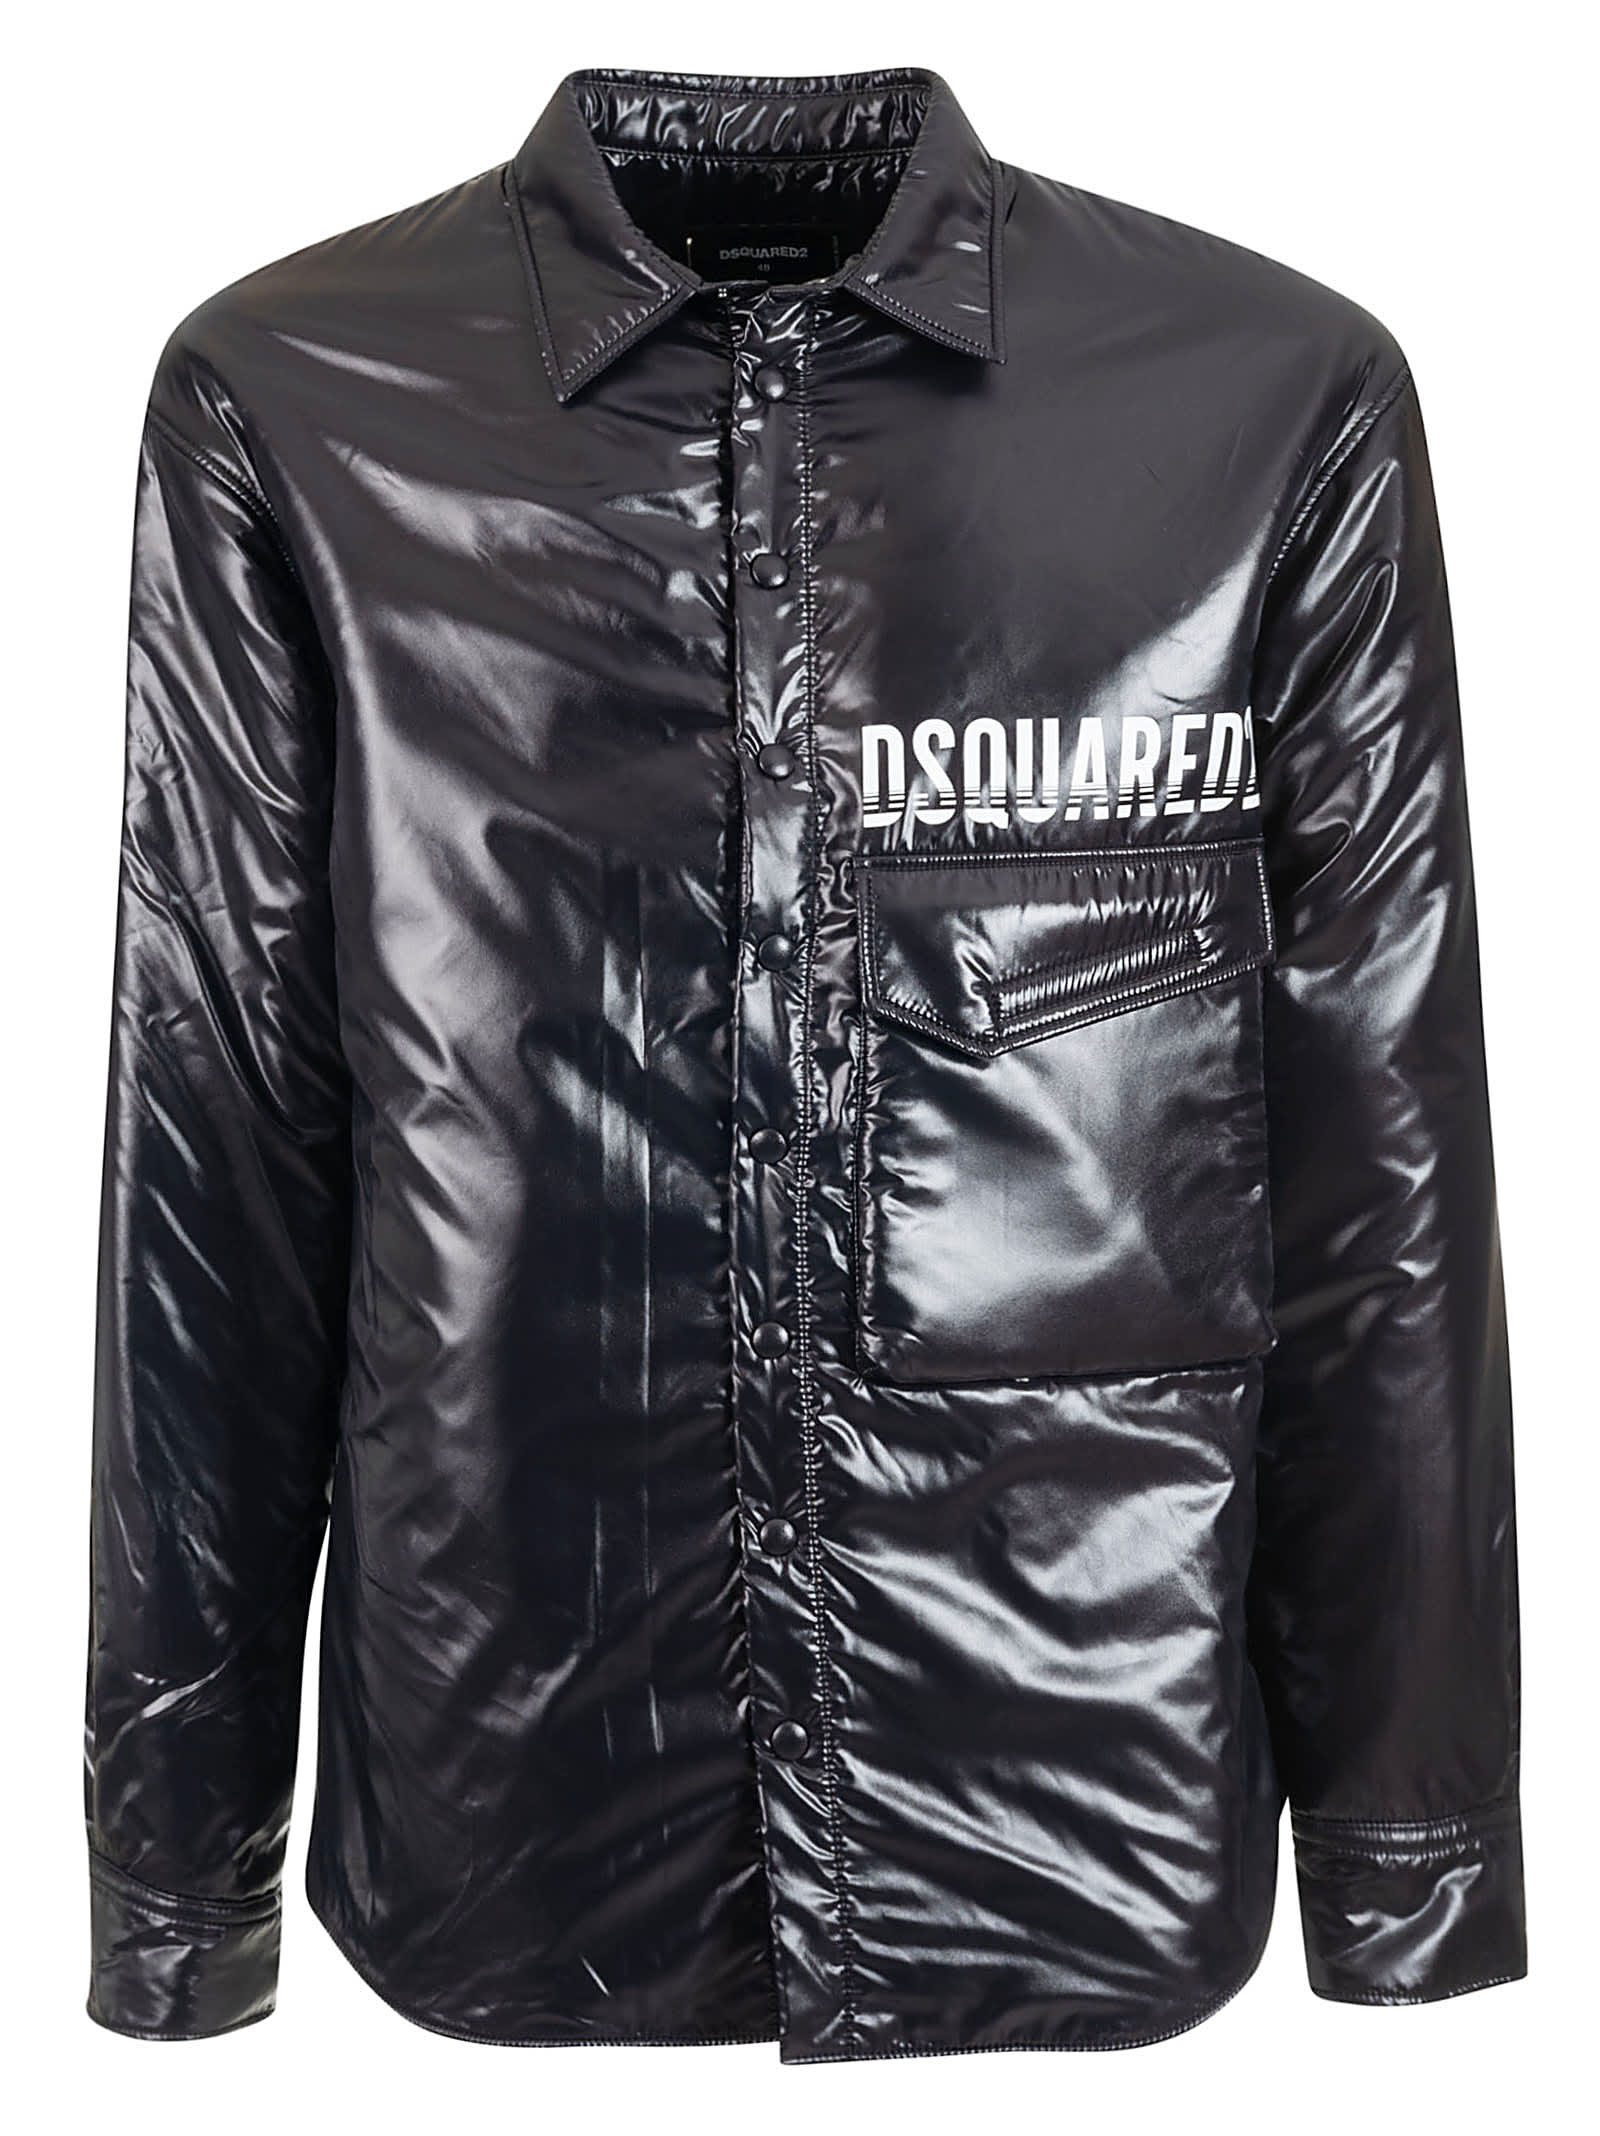 dsquared2 jackets